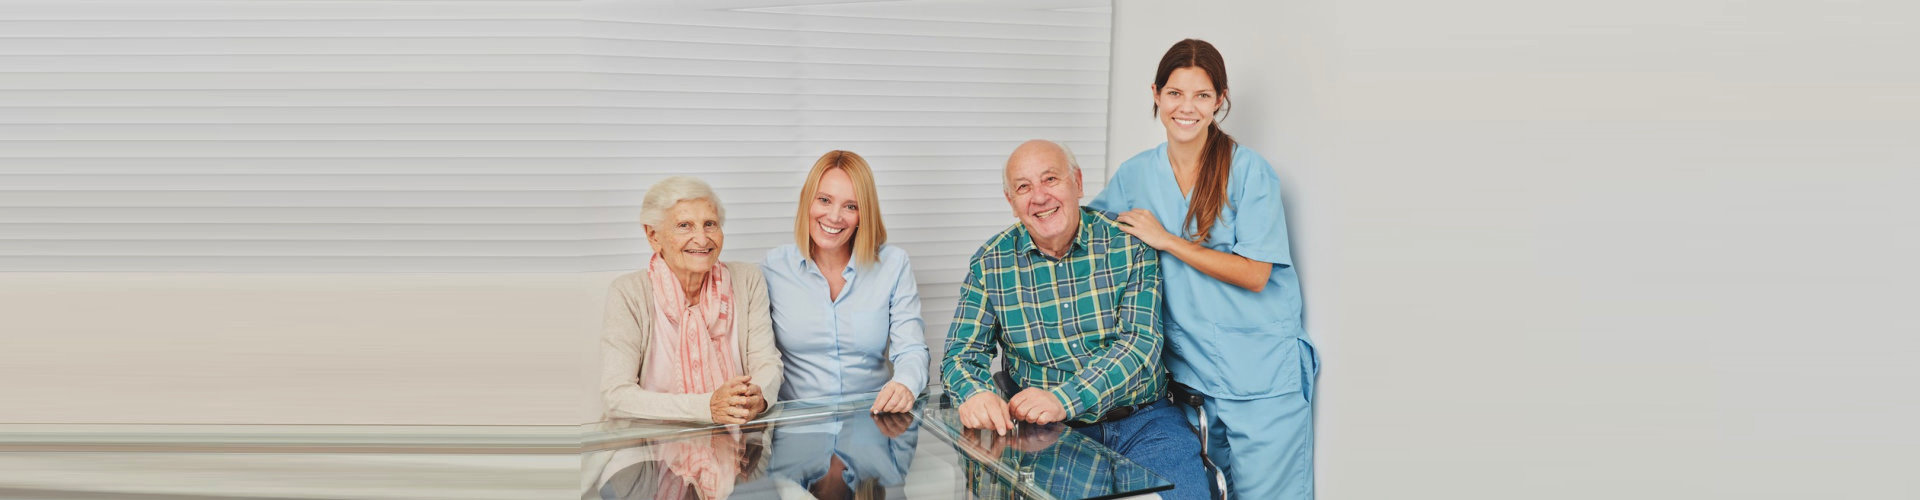 two seniors and two caregivers smiling